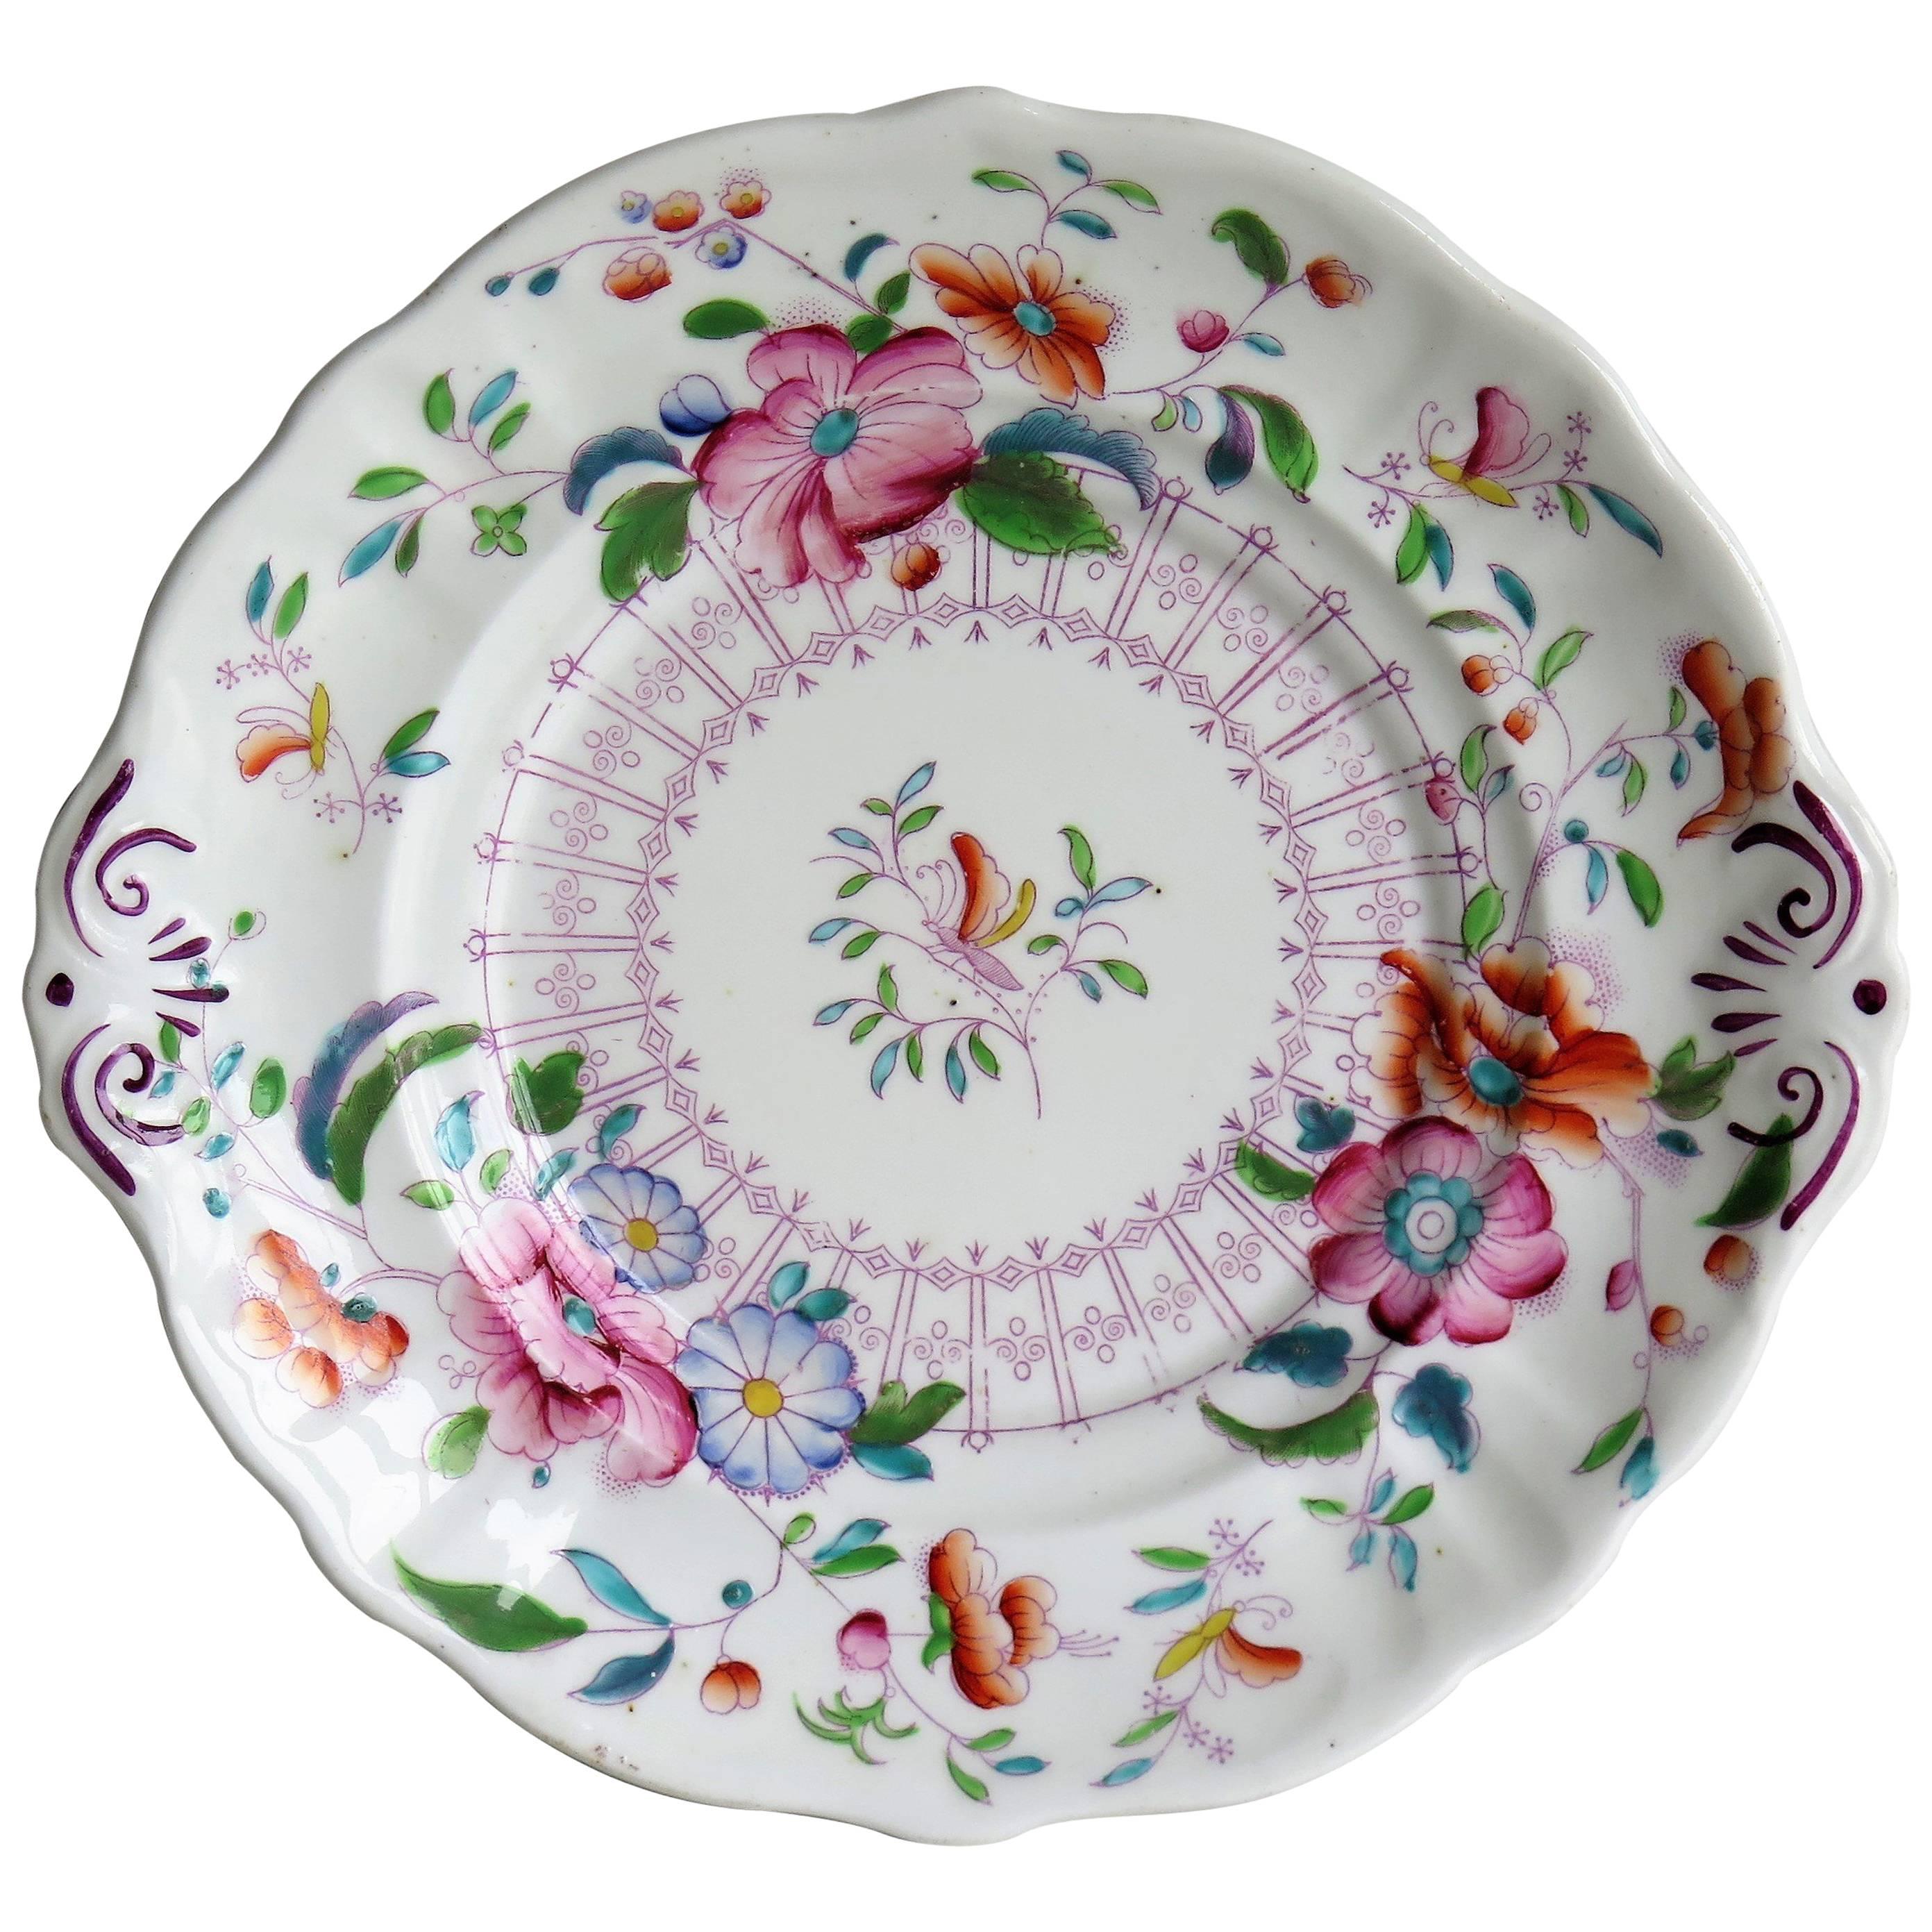 Staffordshire Serving Dish or Plate Hand-Painted Porcelain, English circa 1825